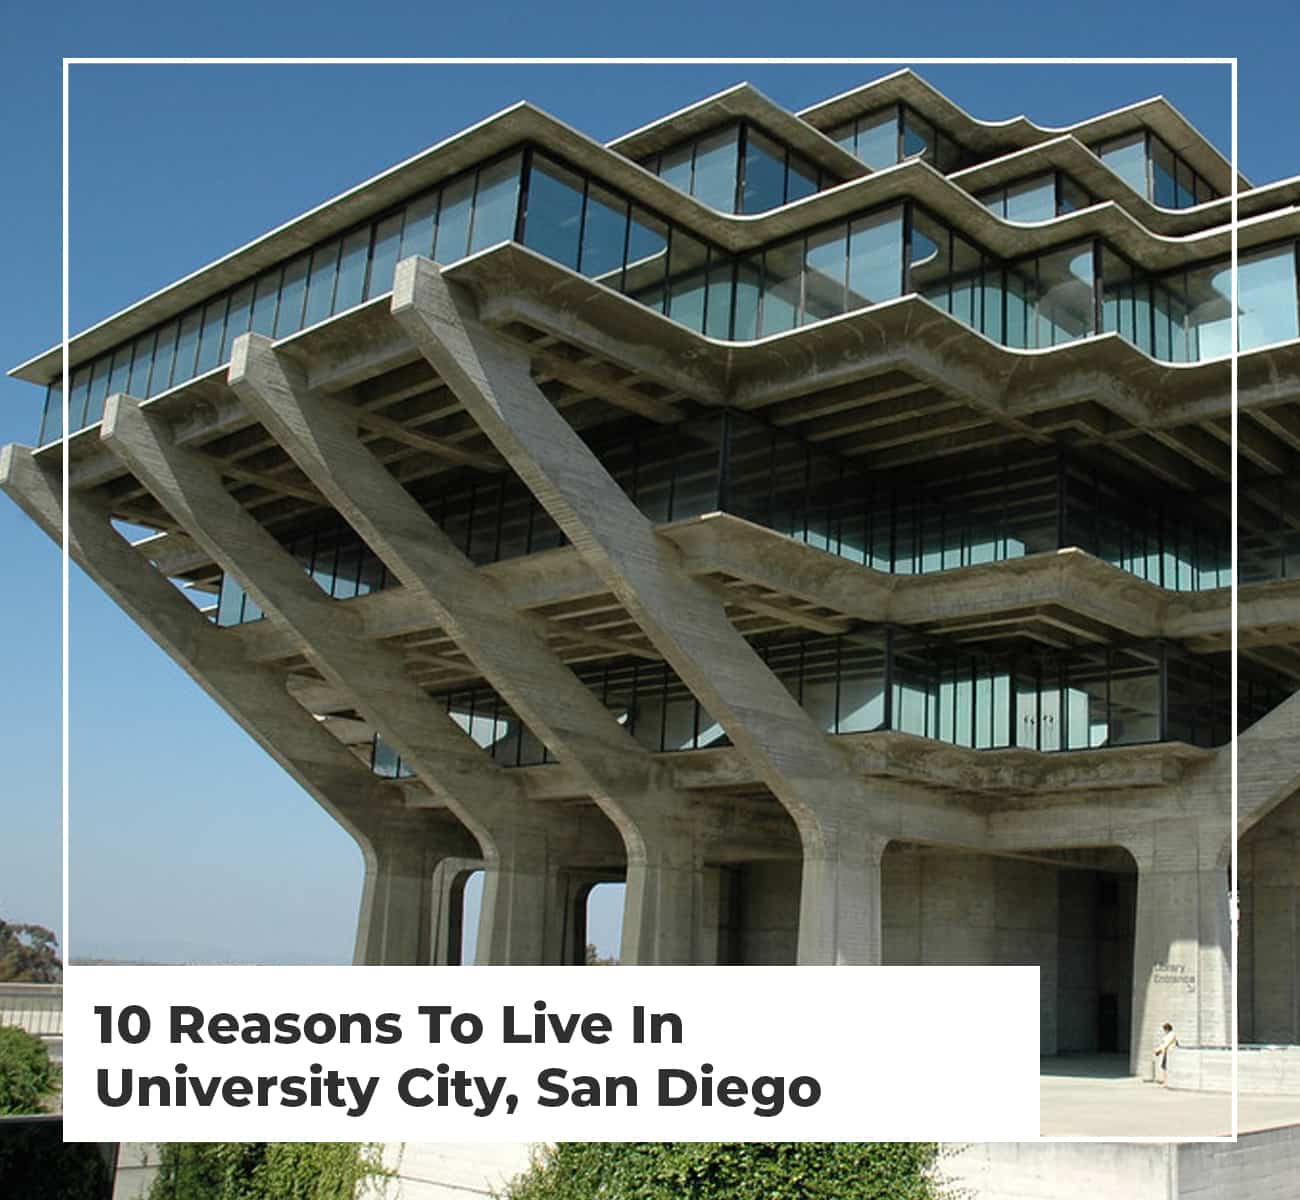 10 Reasons To Live in University City, San Diego